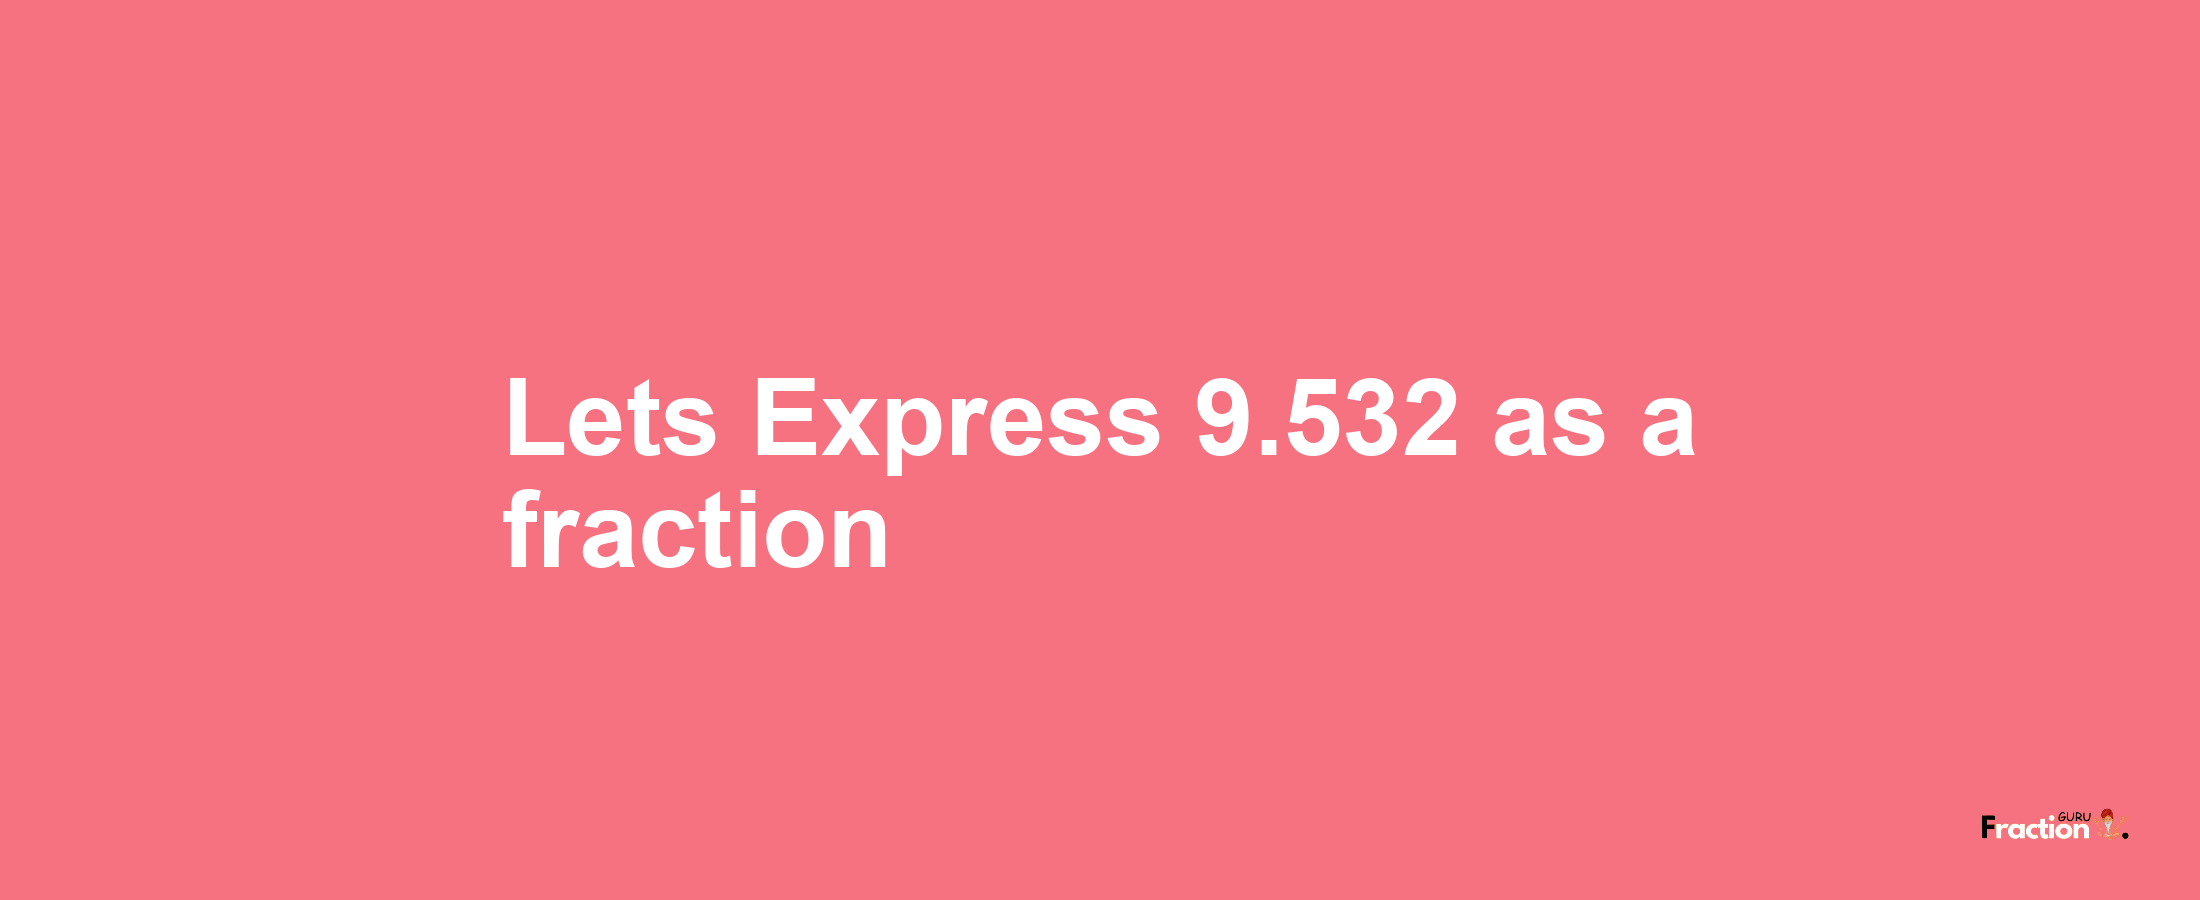 Lets Express 9.532 as afraction